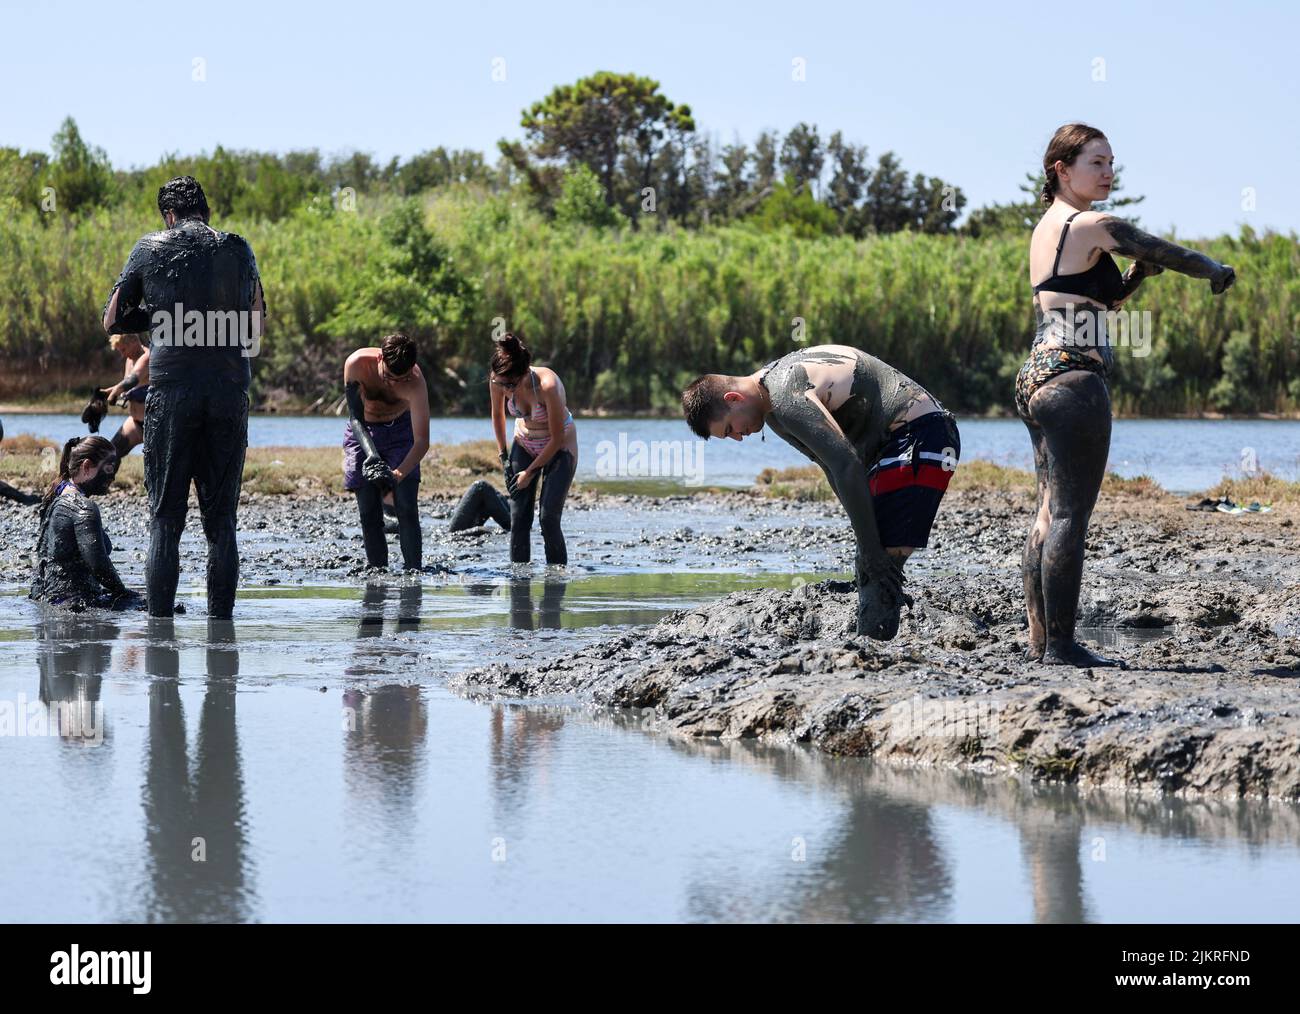 People smear themselves with mud that is believed to be curative at Queen's beach in Nin, Croatia, August 3, 2022. REUTERS/Antonio Bronic Stock Photo